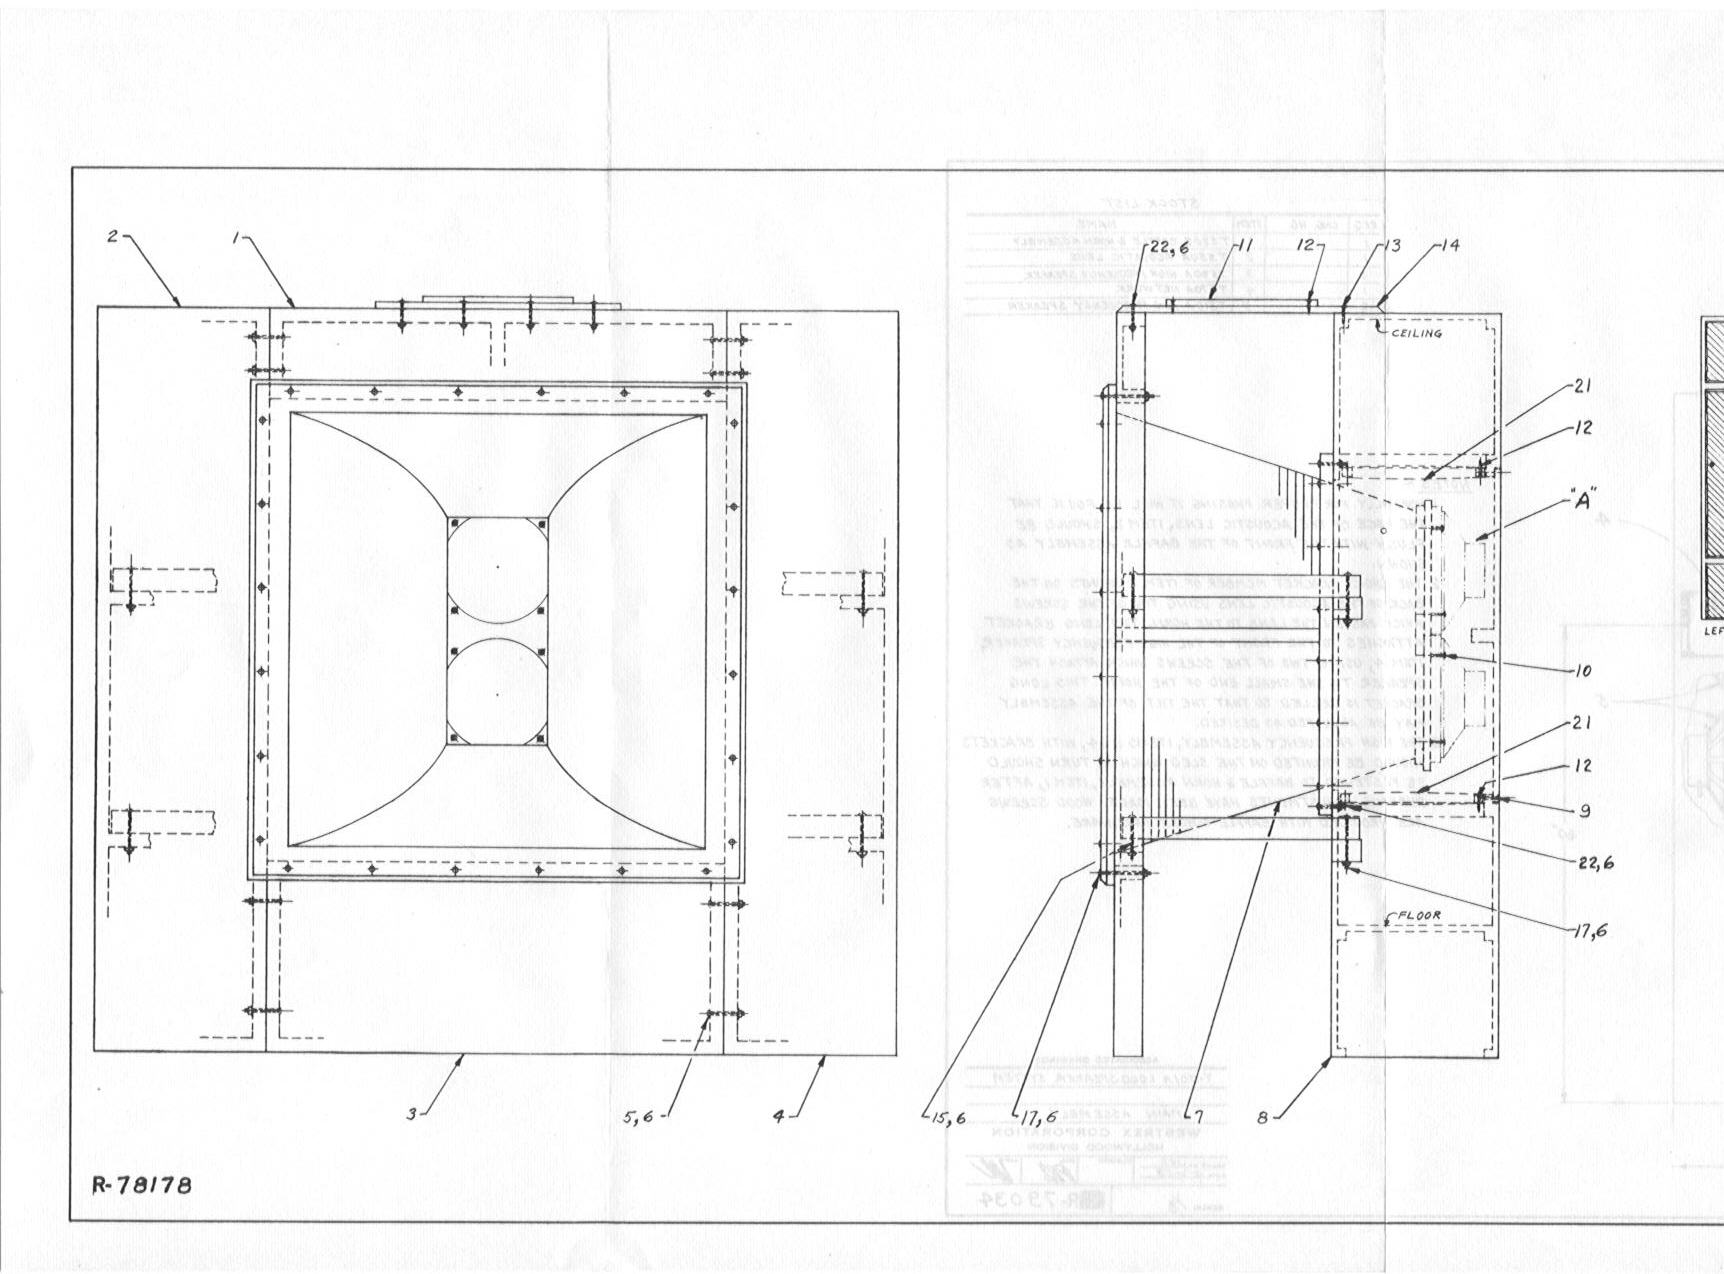 Westrex - T501A Cabinet - Drawing 3 